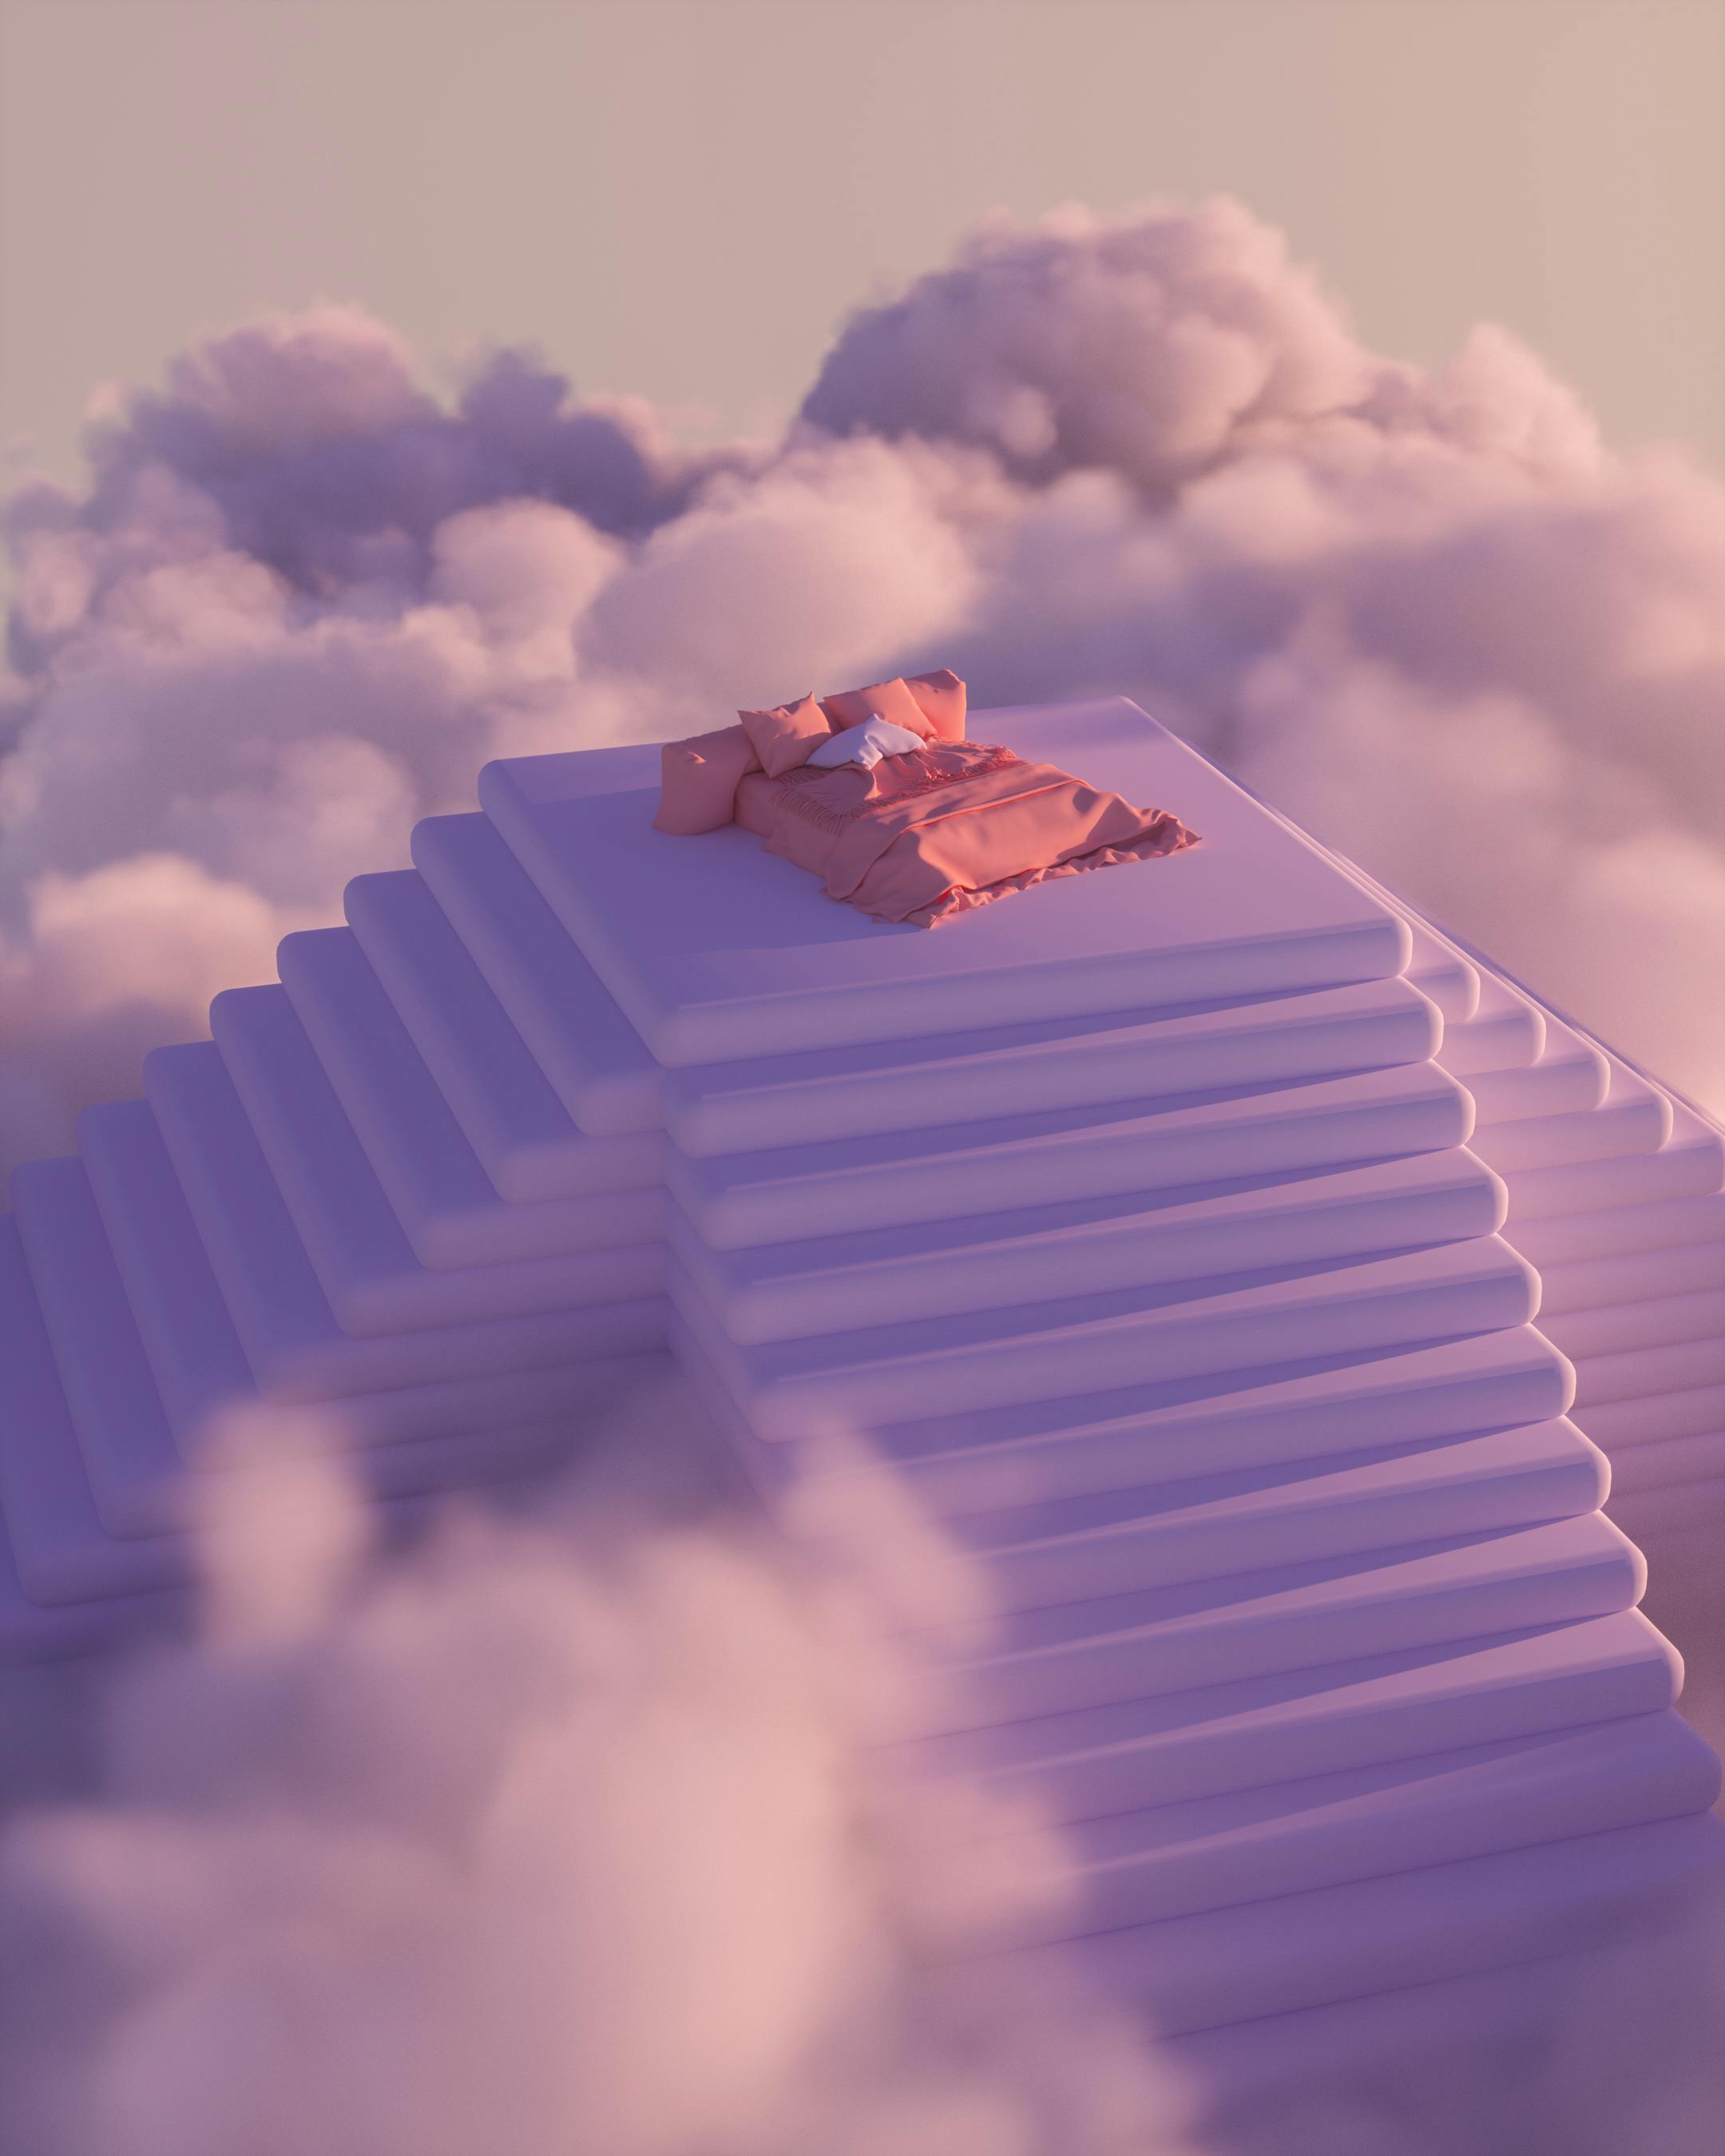 surreal scene of a stairs and bed in the clouds